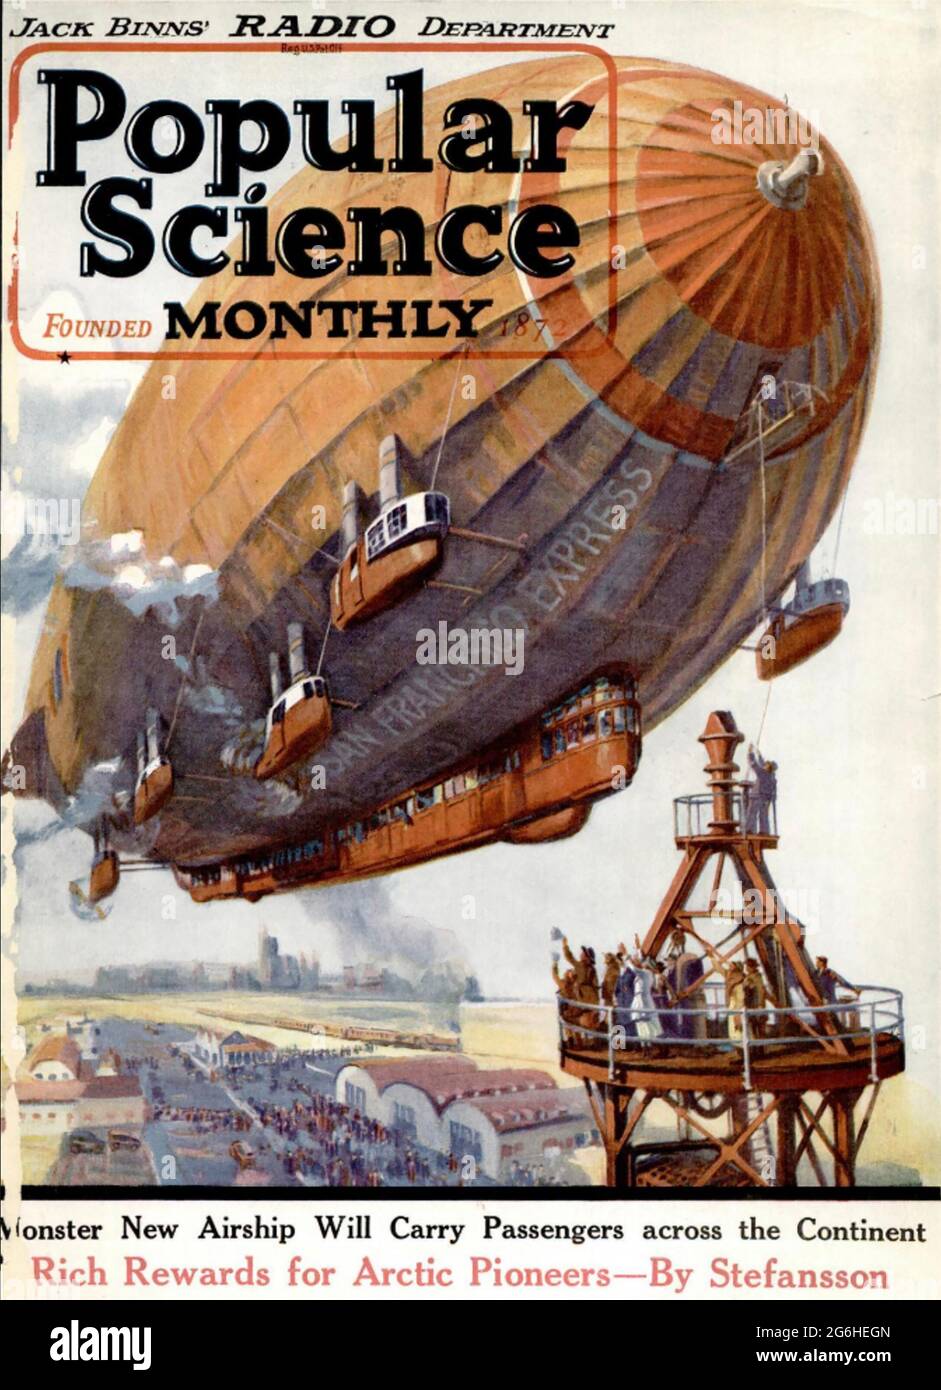 POPULAR SCIENCE  An American quarterly magazine, first published in 1872. The January 1932 issue shows an intercontinental airship. Stock Photo